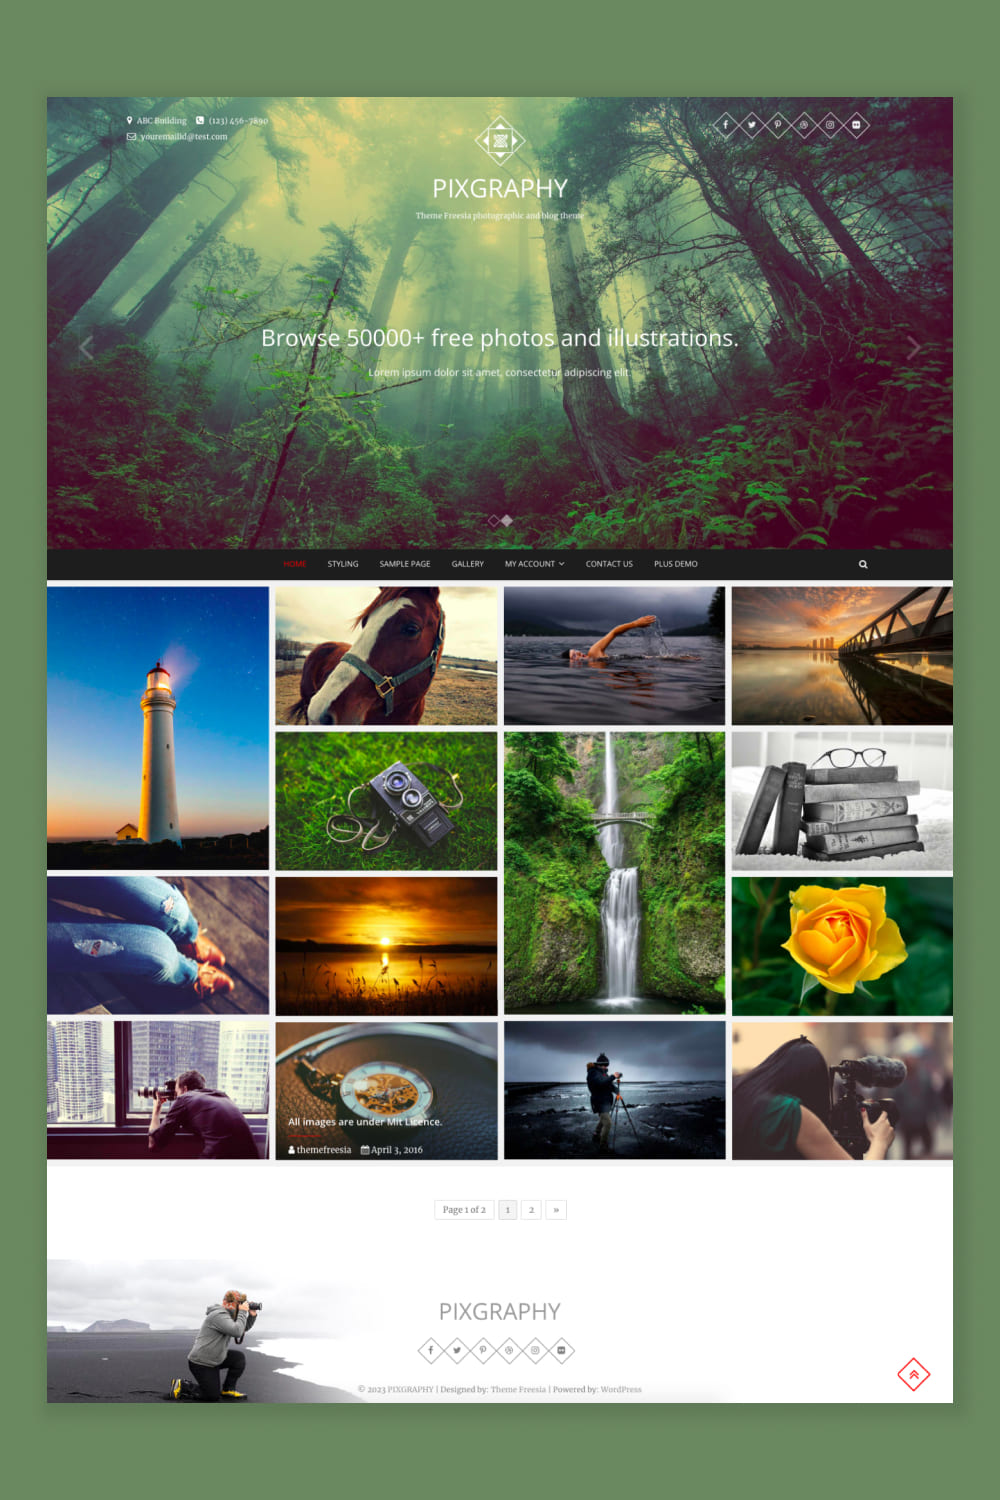 This is the fanciest themes with a simple design for talented photographers.